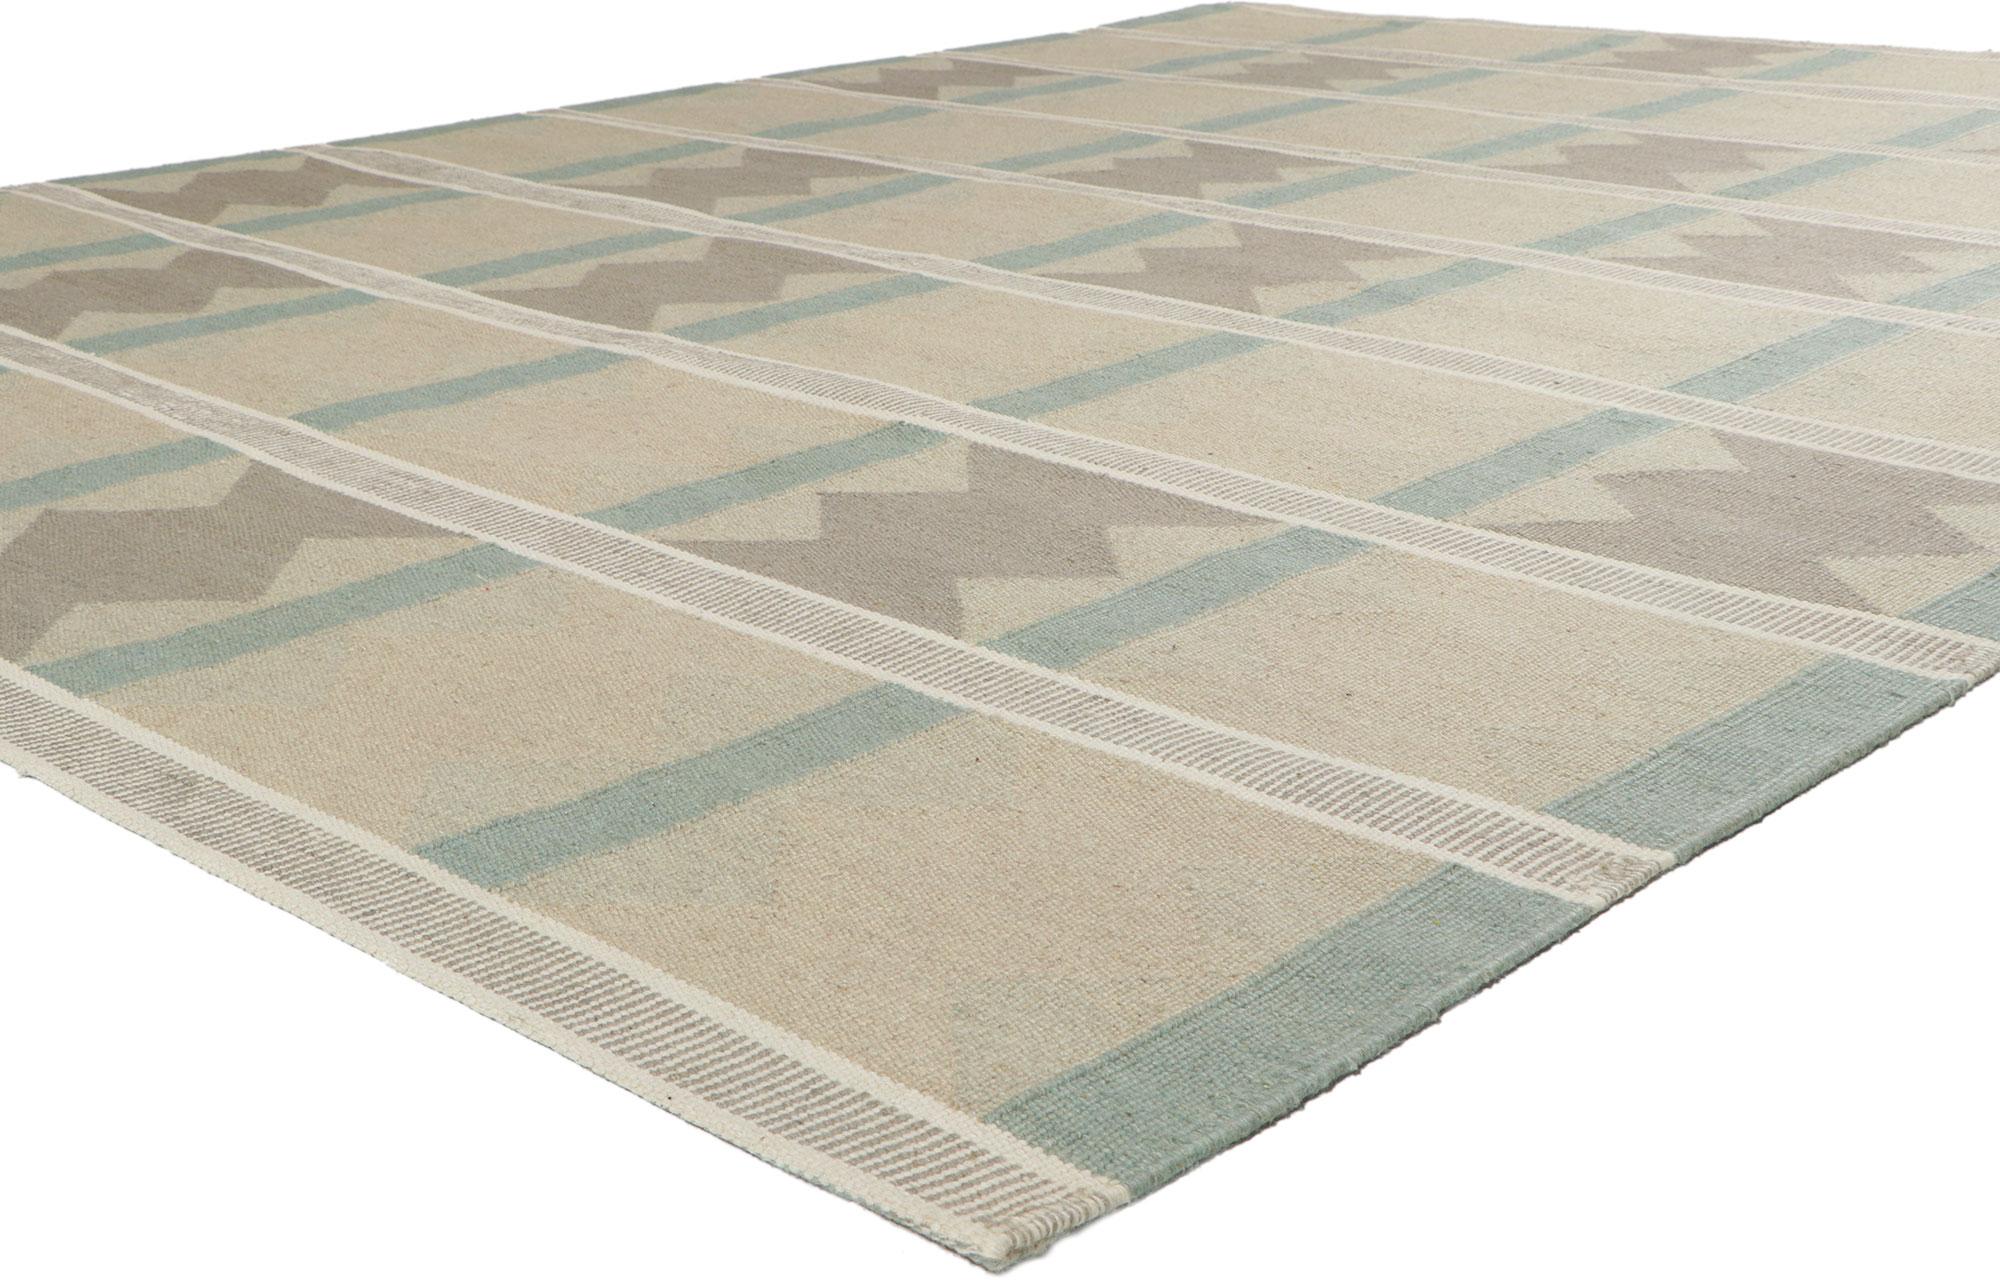 30844 New Swedish Ingegerd Silow Inspired Kilim Rug with Scandinavian Modern Style 09'03 x 11'11. With its simplicity, geometric design and soft colors, this hand-woven wool Swedish inspired Kilim rug provides a feeling of cozy contentment without